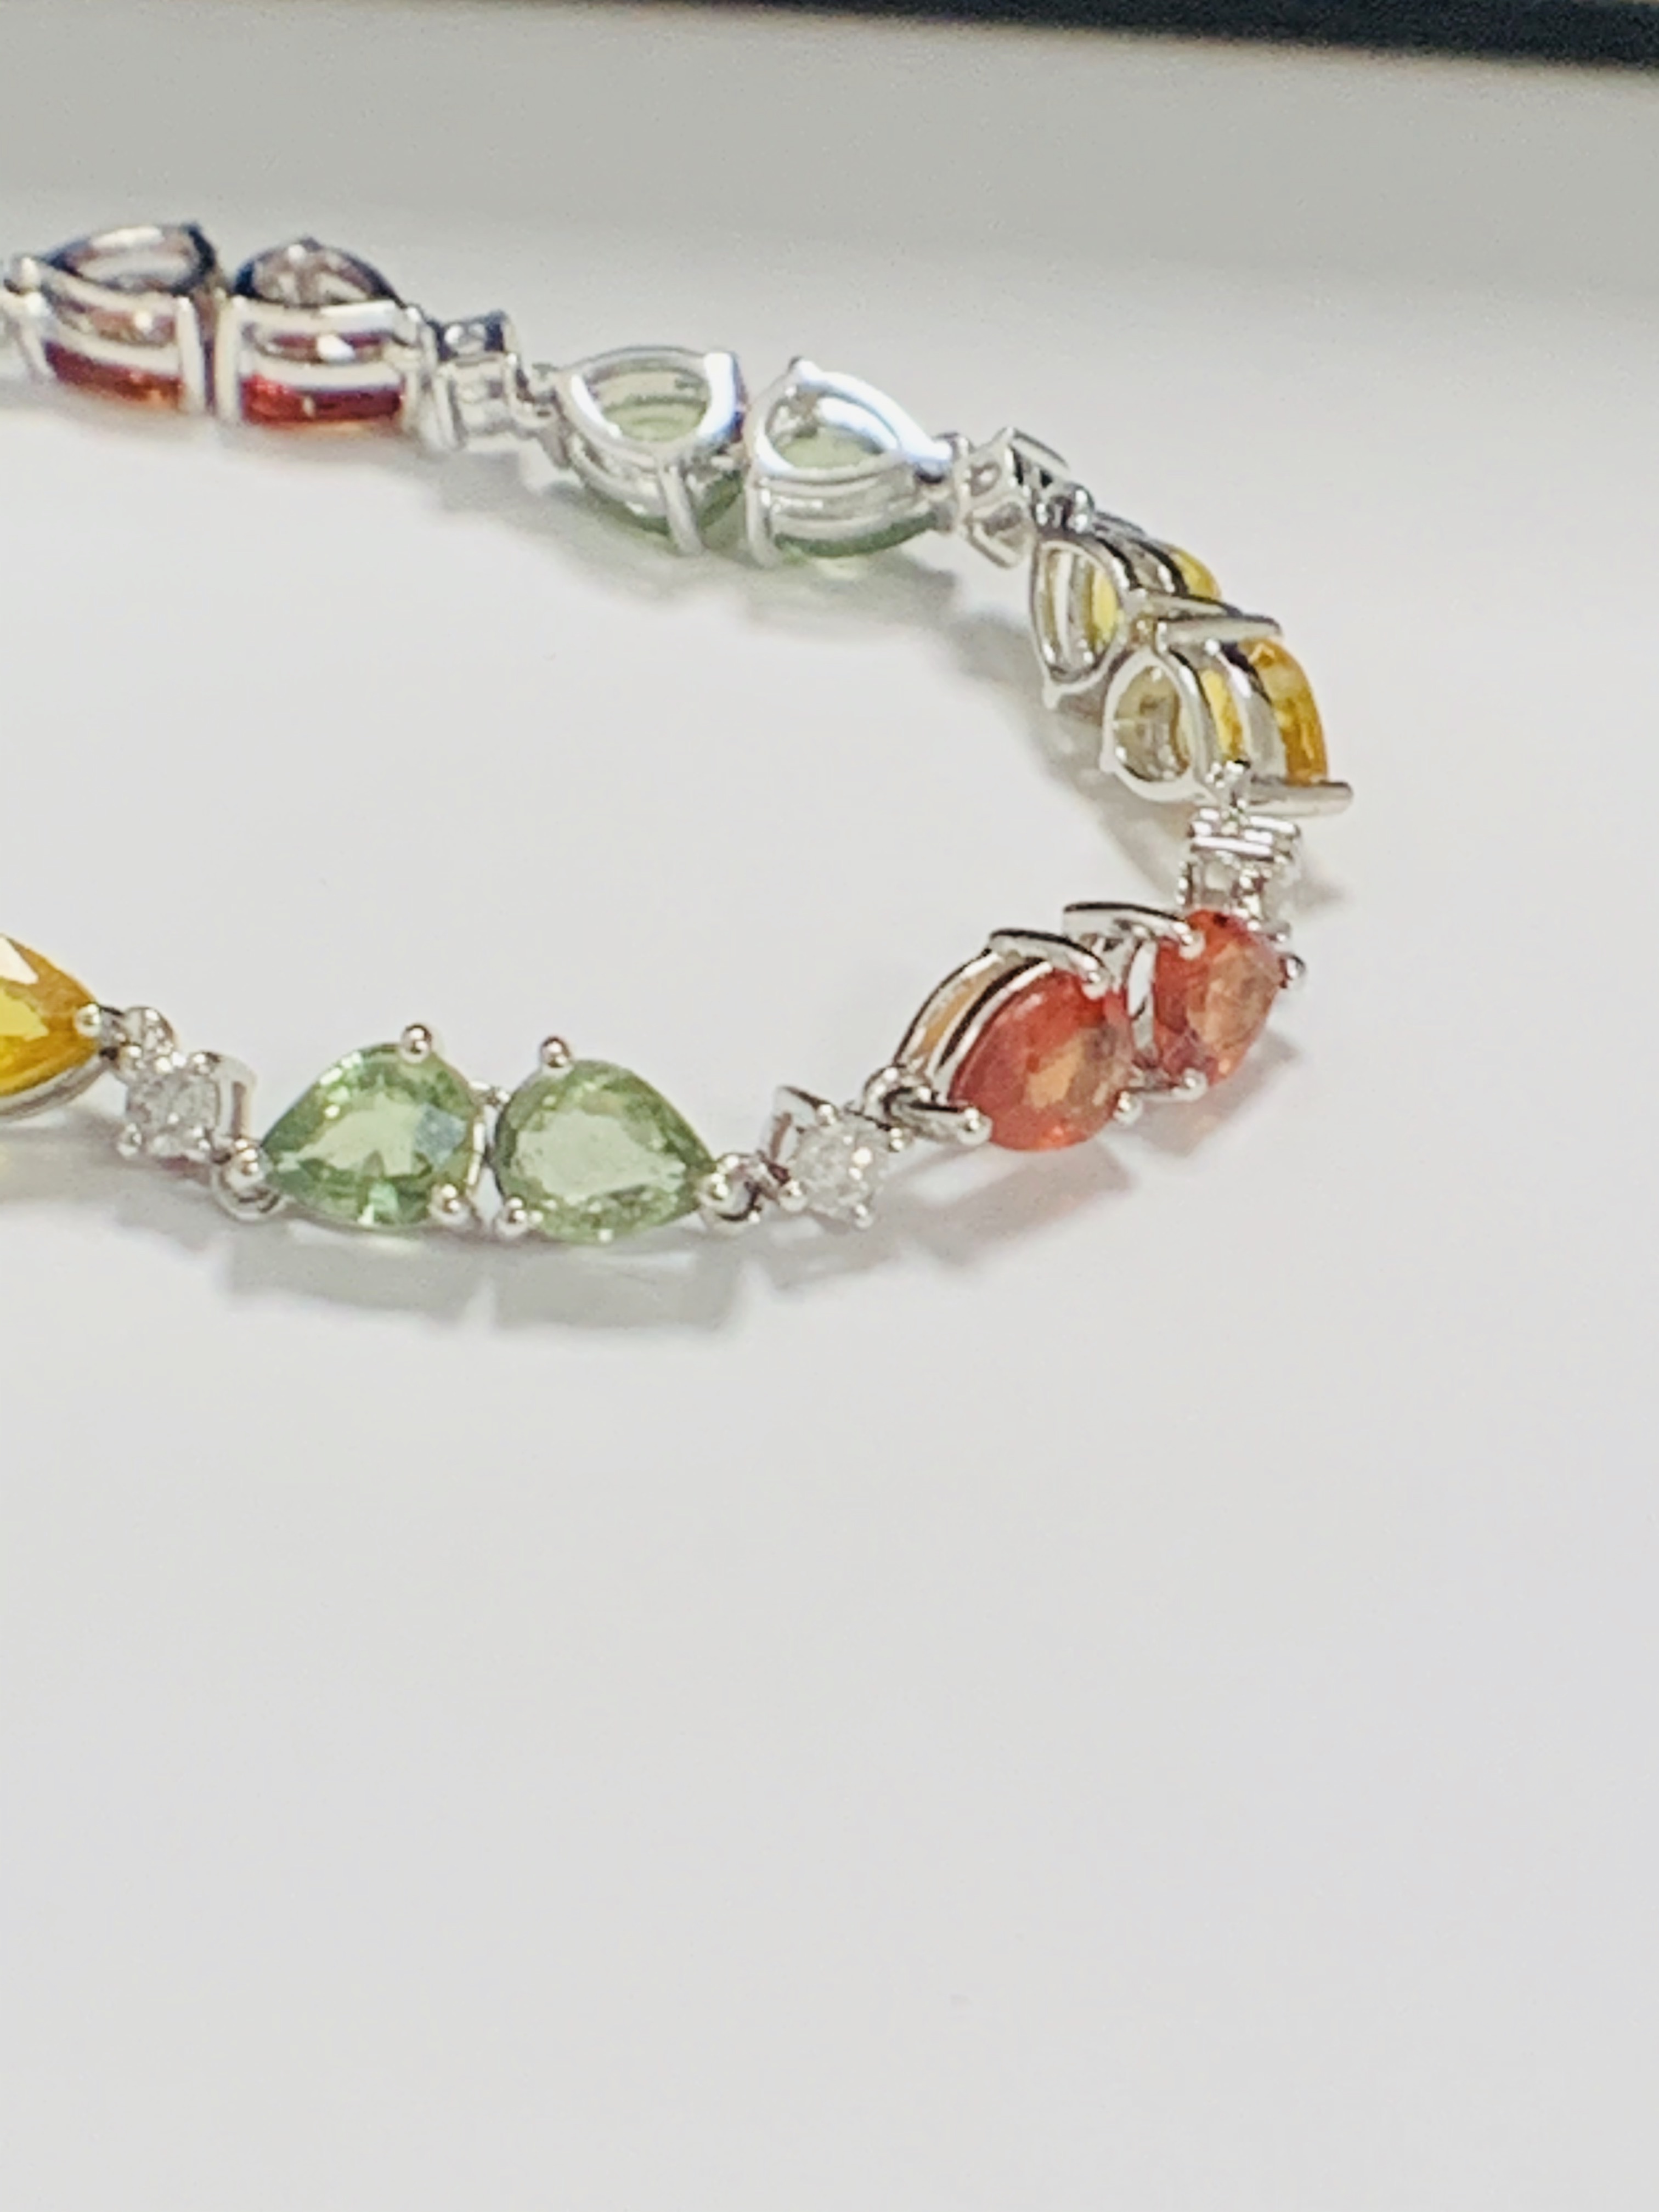 14ct White Gold Sapphire and Diamond bracelet featuring, 22 pear cut, yellow, green and orange Sapph - Image 20 of 24